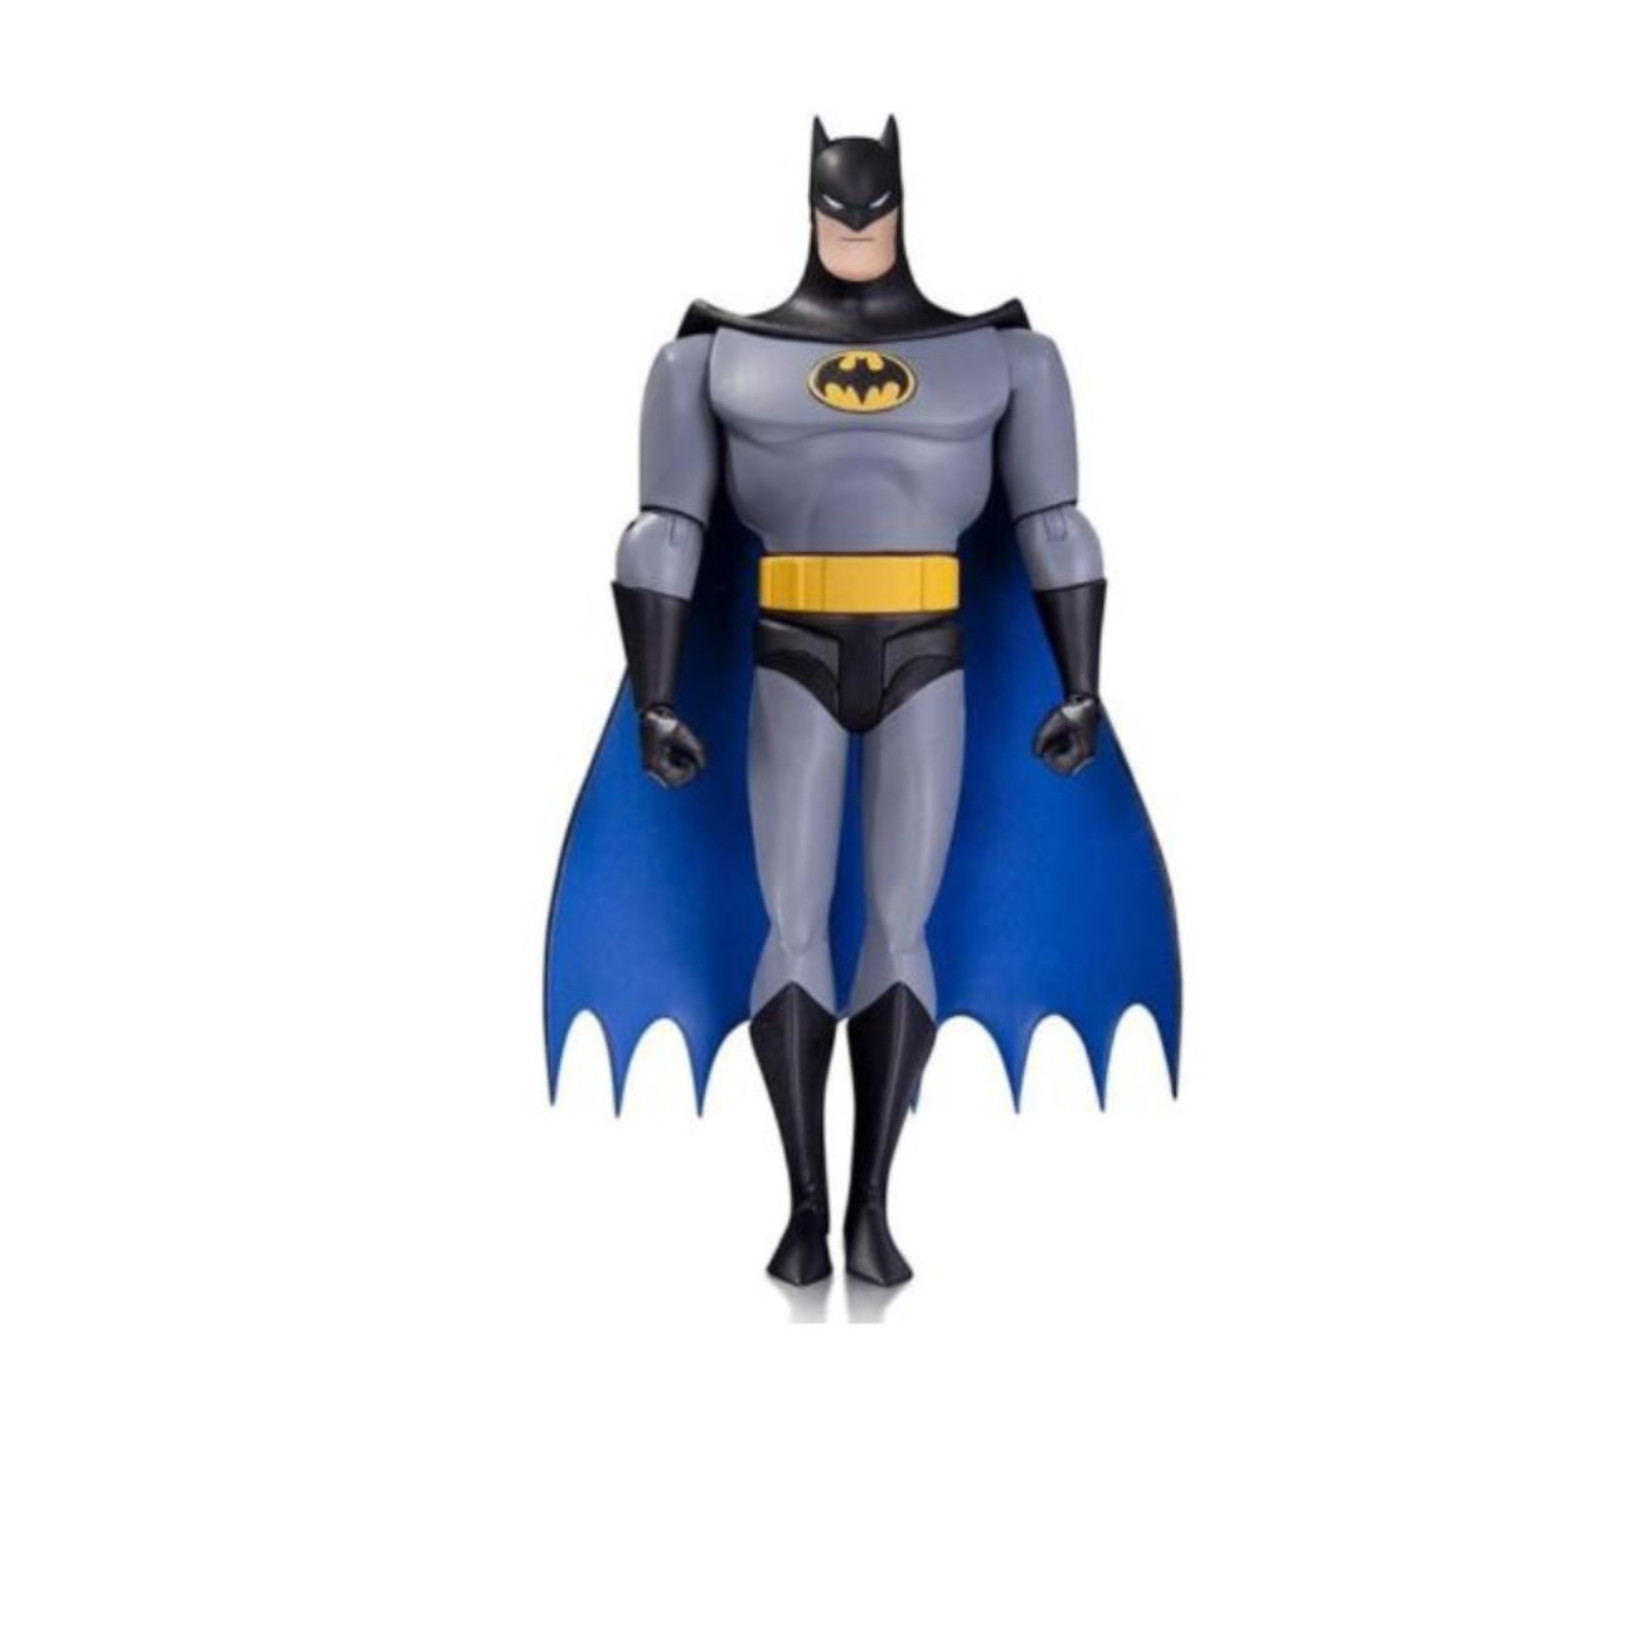 DC BATMAN THE ANIMATED SERIES 01 BATMAN EXPRESSIONS PACK